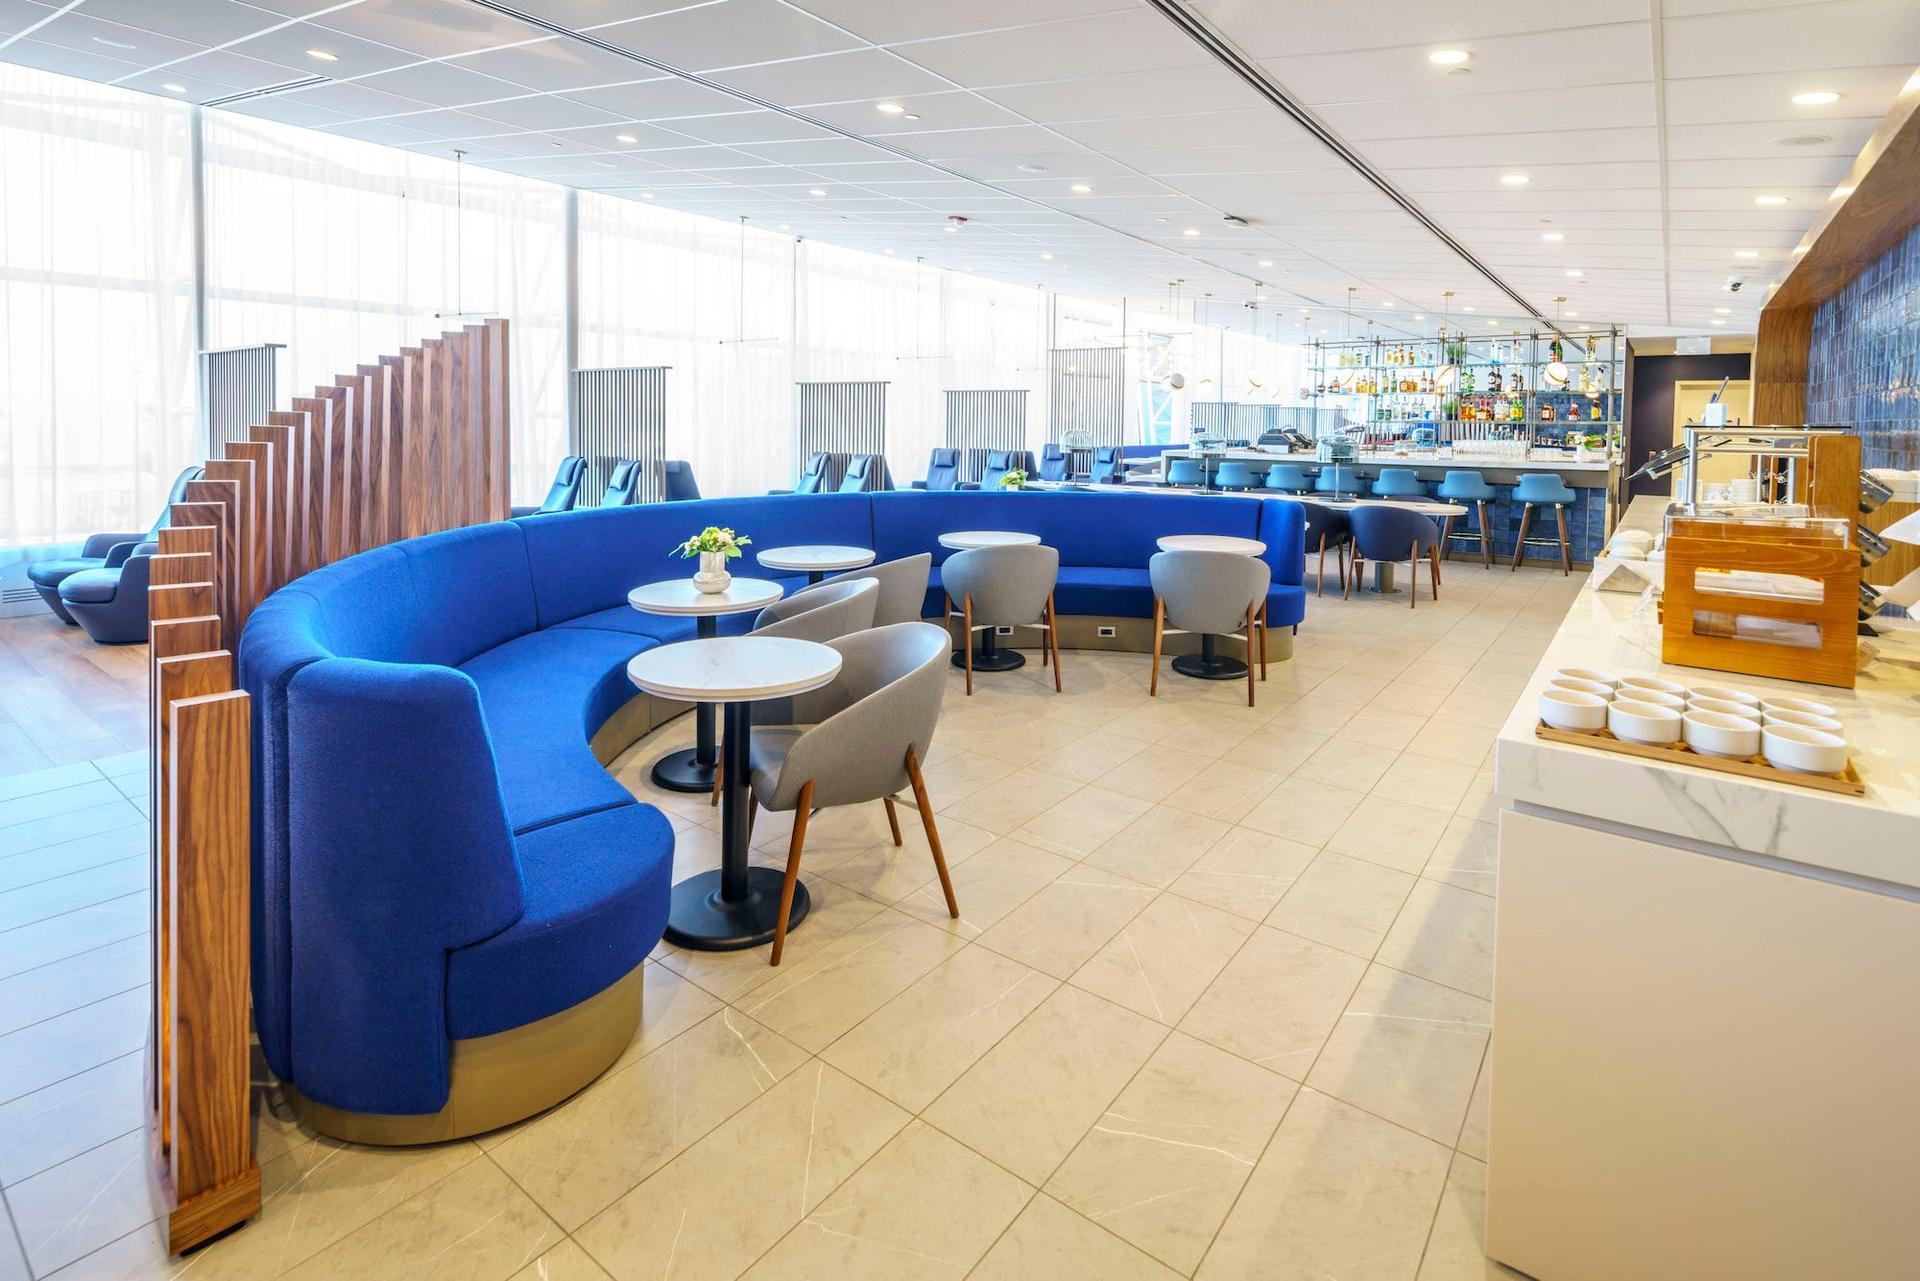 Air France/KLM Lounge operated by Plaza Premium Group image 9 of 10